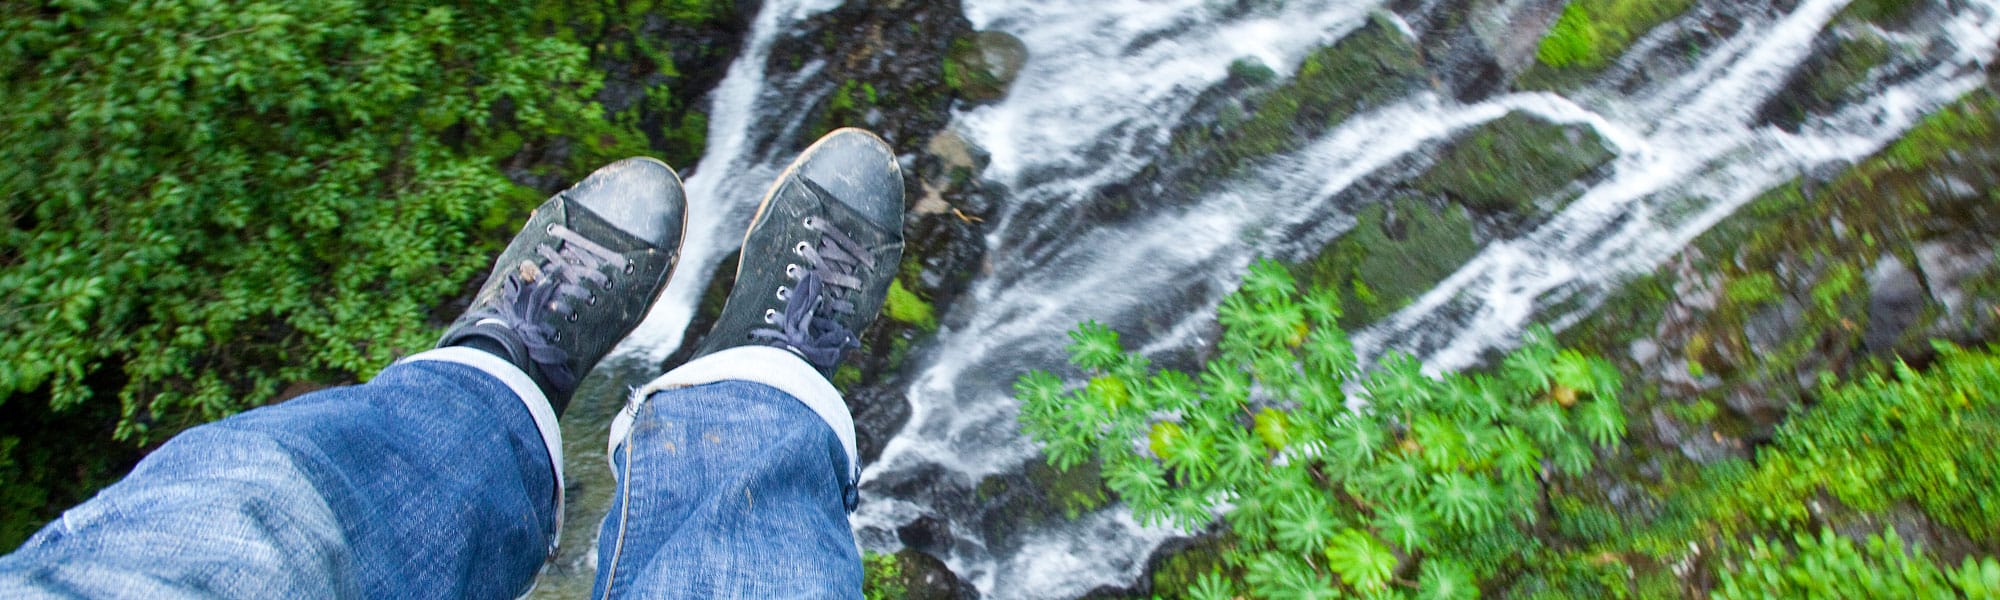 Close up of person's feet riding biplane over waterfall